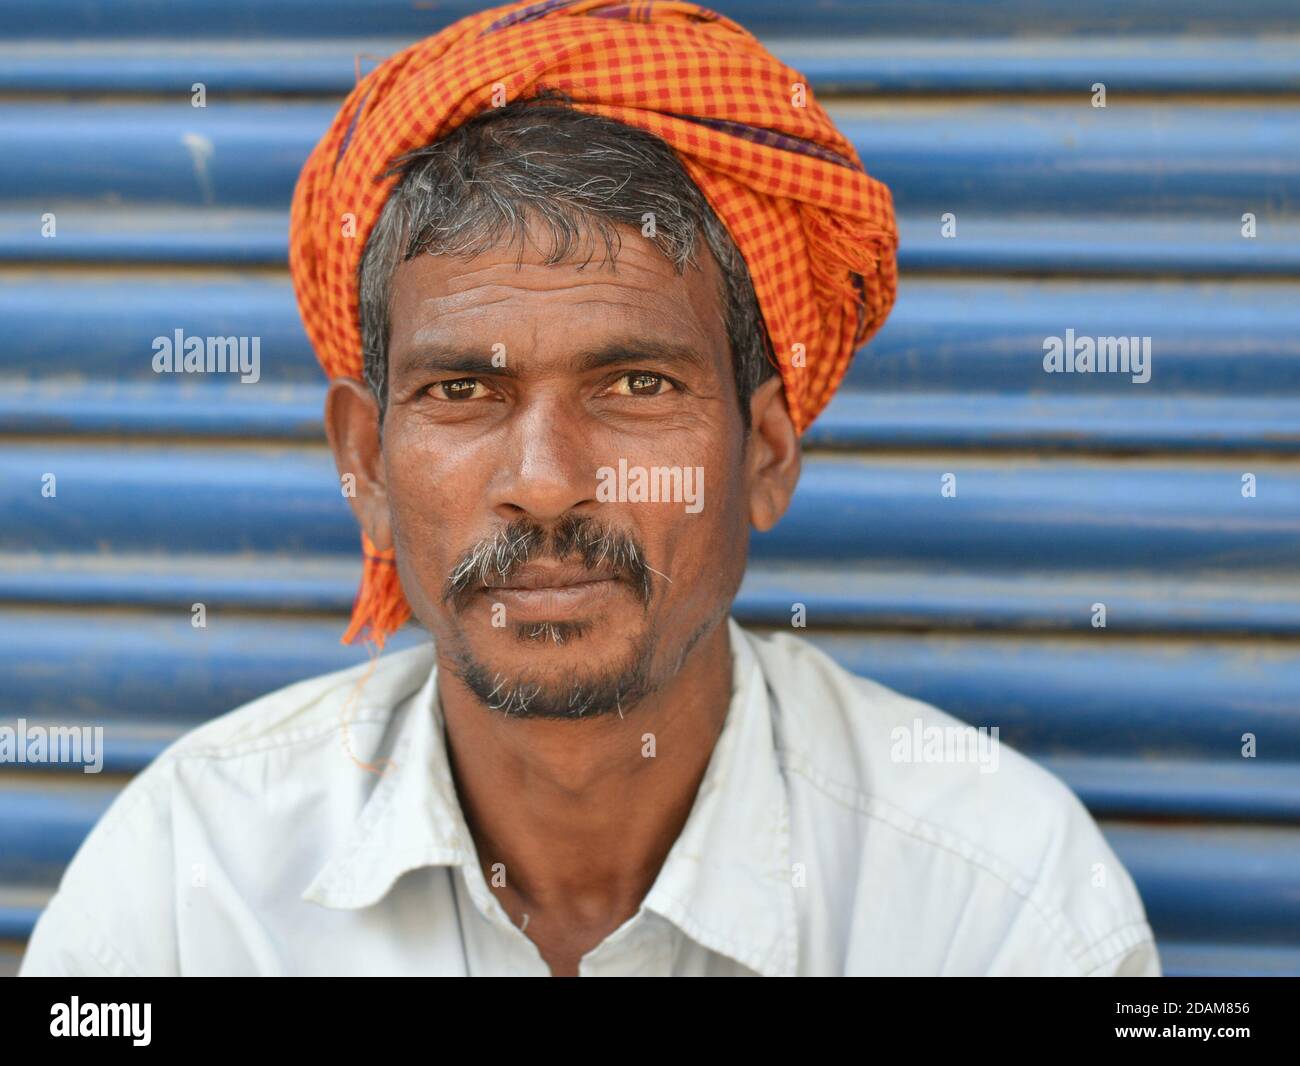 Indian migrant labourer wears an orange-checkered turban-like head wrap and poses for the camera. Stock Photo